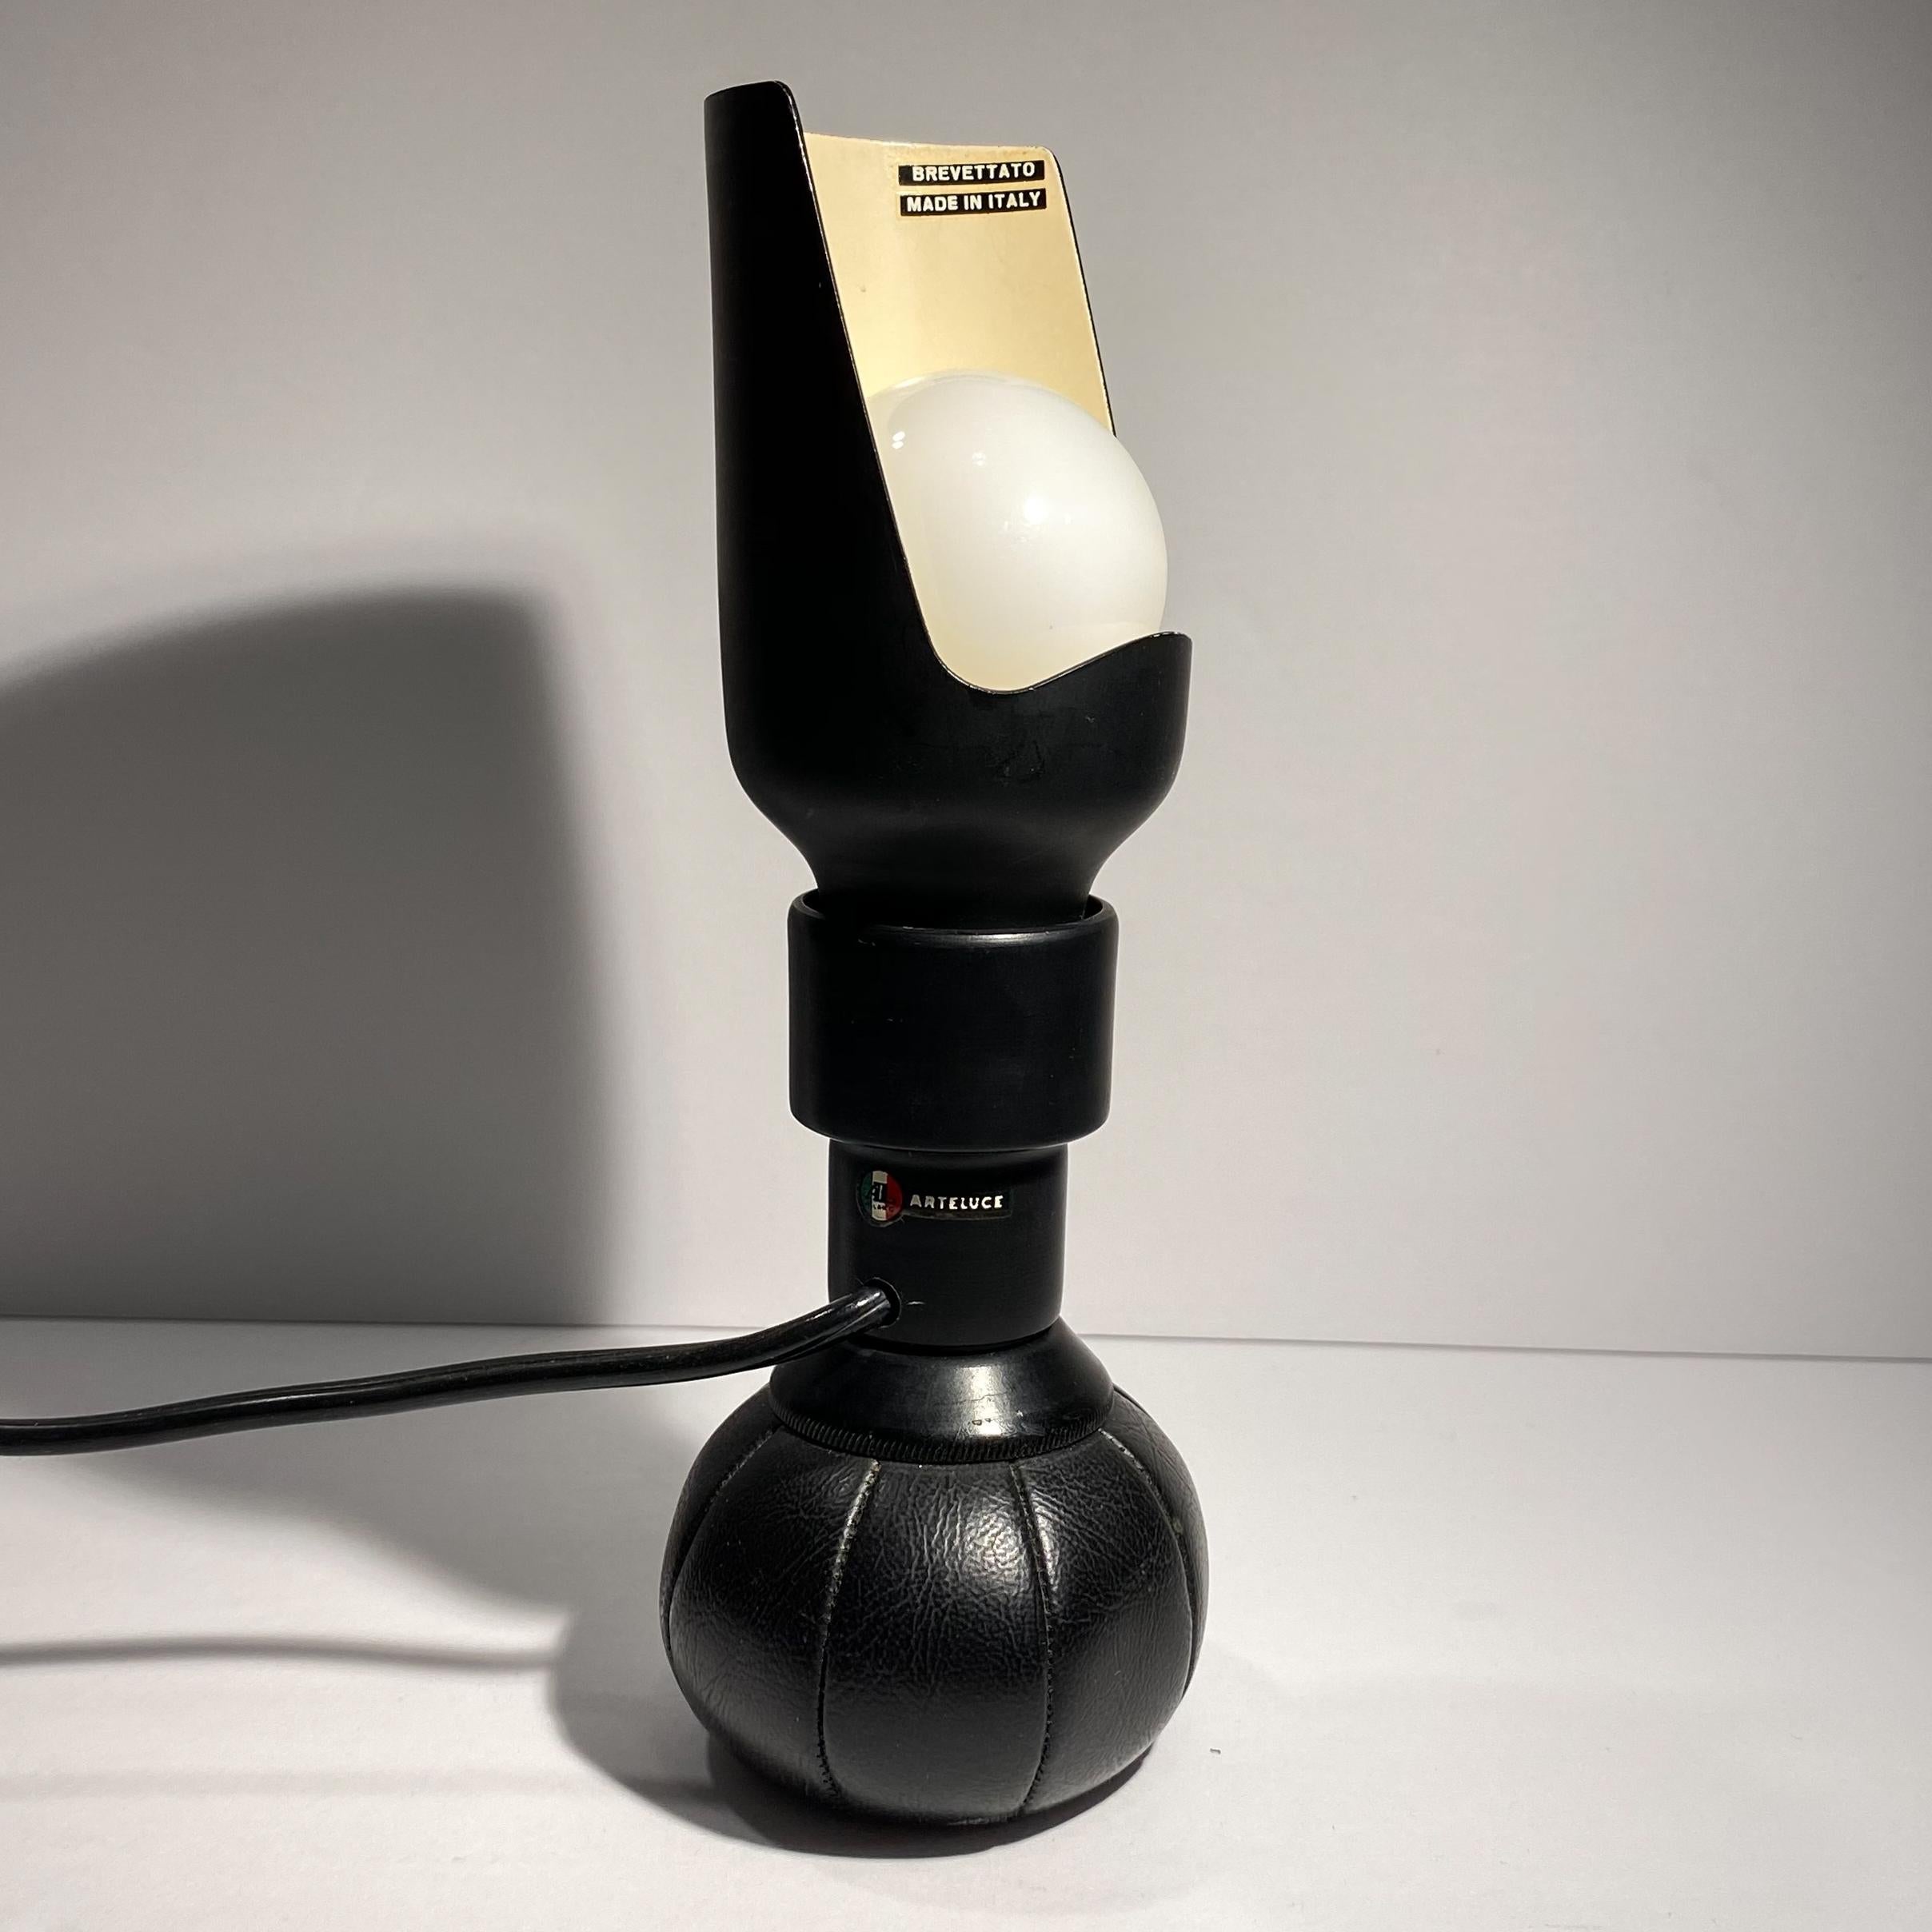 Table lamp model 600P by renowned Italian lighting designer Gino Sarfatti, produced by Arteluce, circa 1966. An early example with the cut-out lacquered aluminum diffuser. The lamp rests atop a leather pouch filled with lead pellets, allowing for